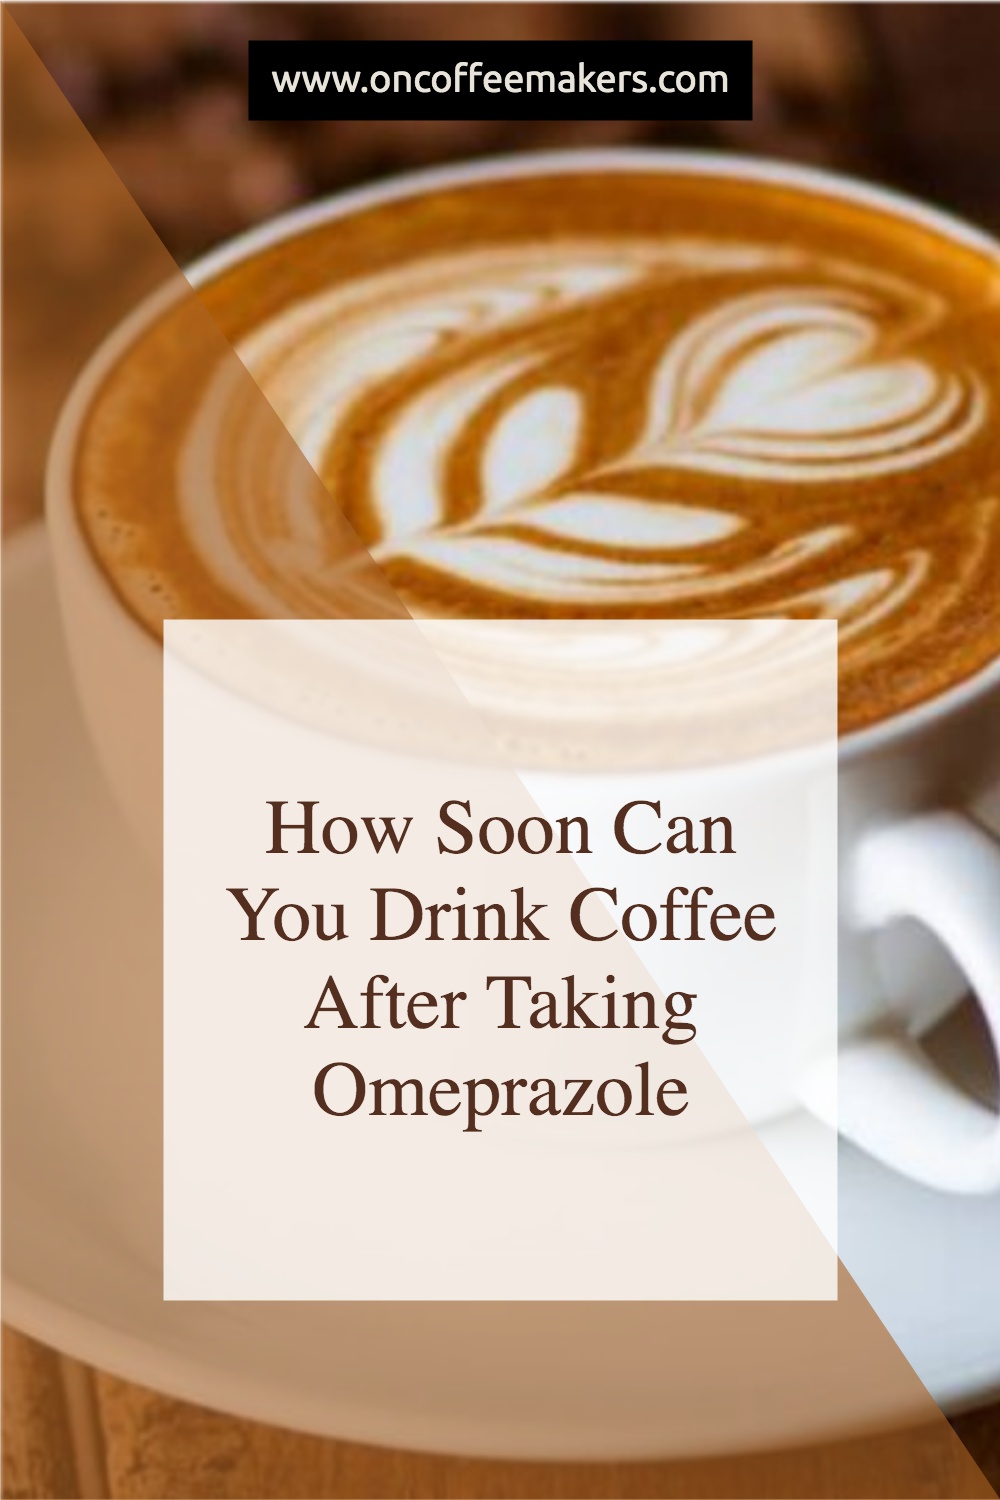 How-Soon-Can-You-Drink-Coffee-After-Taking-Omeprazole.jpg